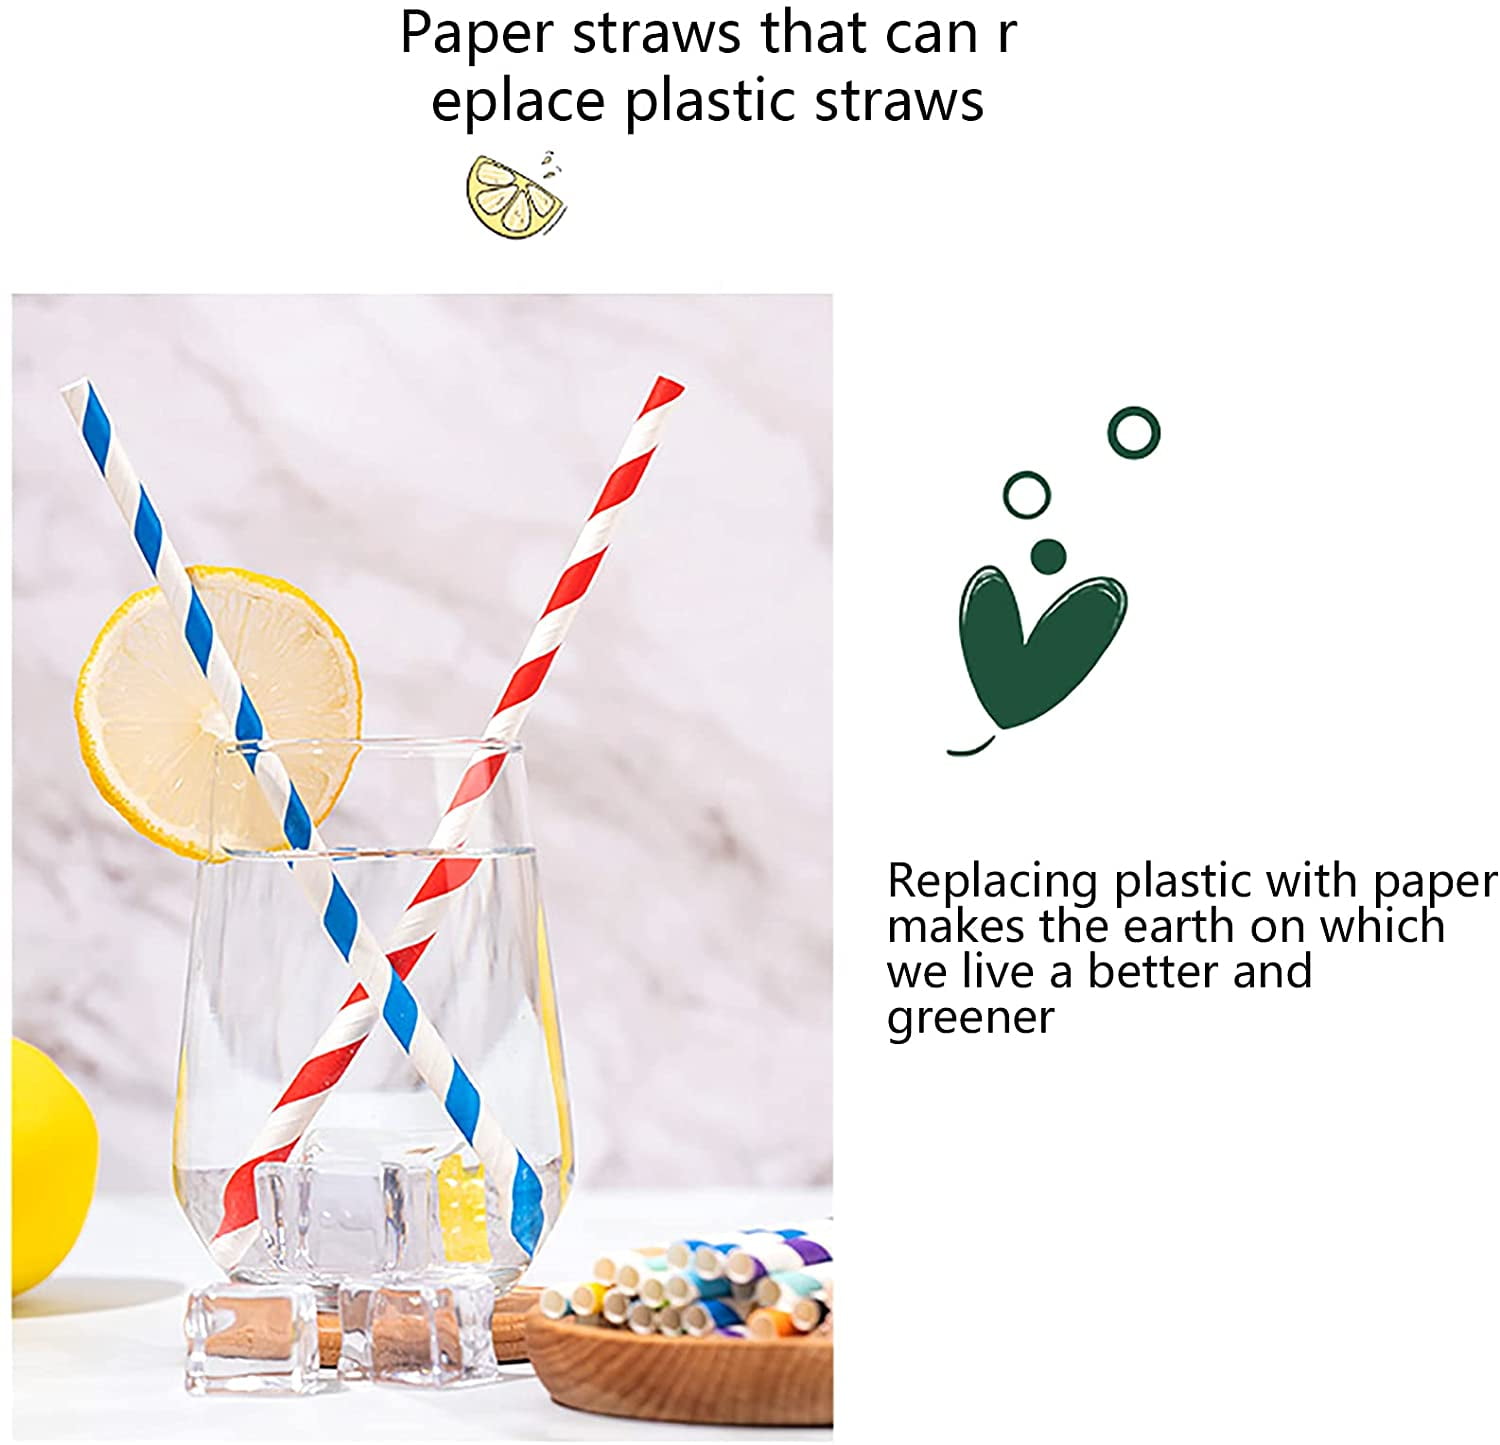 Restaurantware 7.8 inch Paper Straws for Drinking, 100 Sturdy Eco-Friendly Paper Straws - Biodegradable, Solid Design, Pink Paper Biodegradable